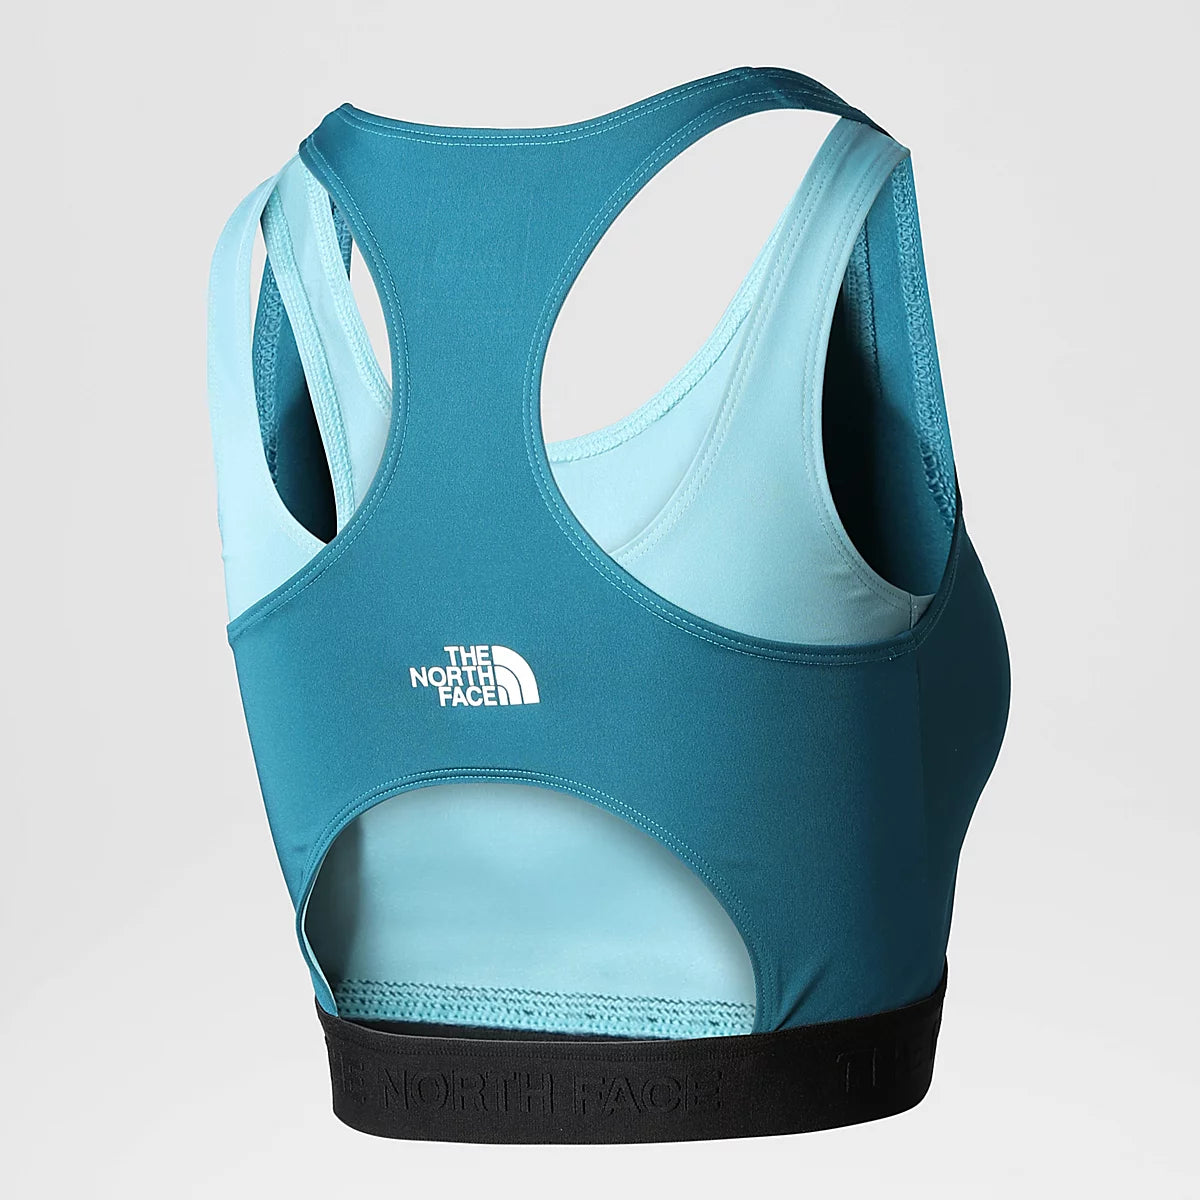 THE NORTH FACE TECH TANK